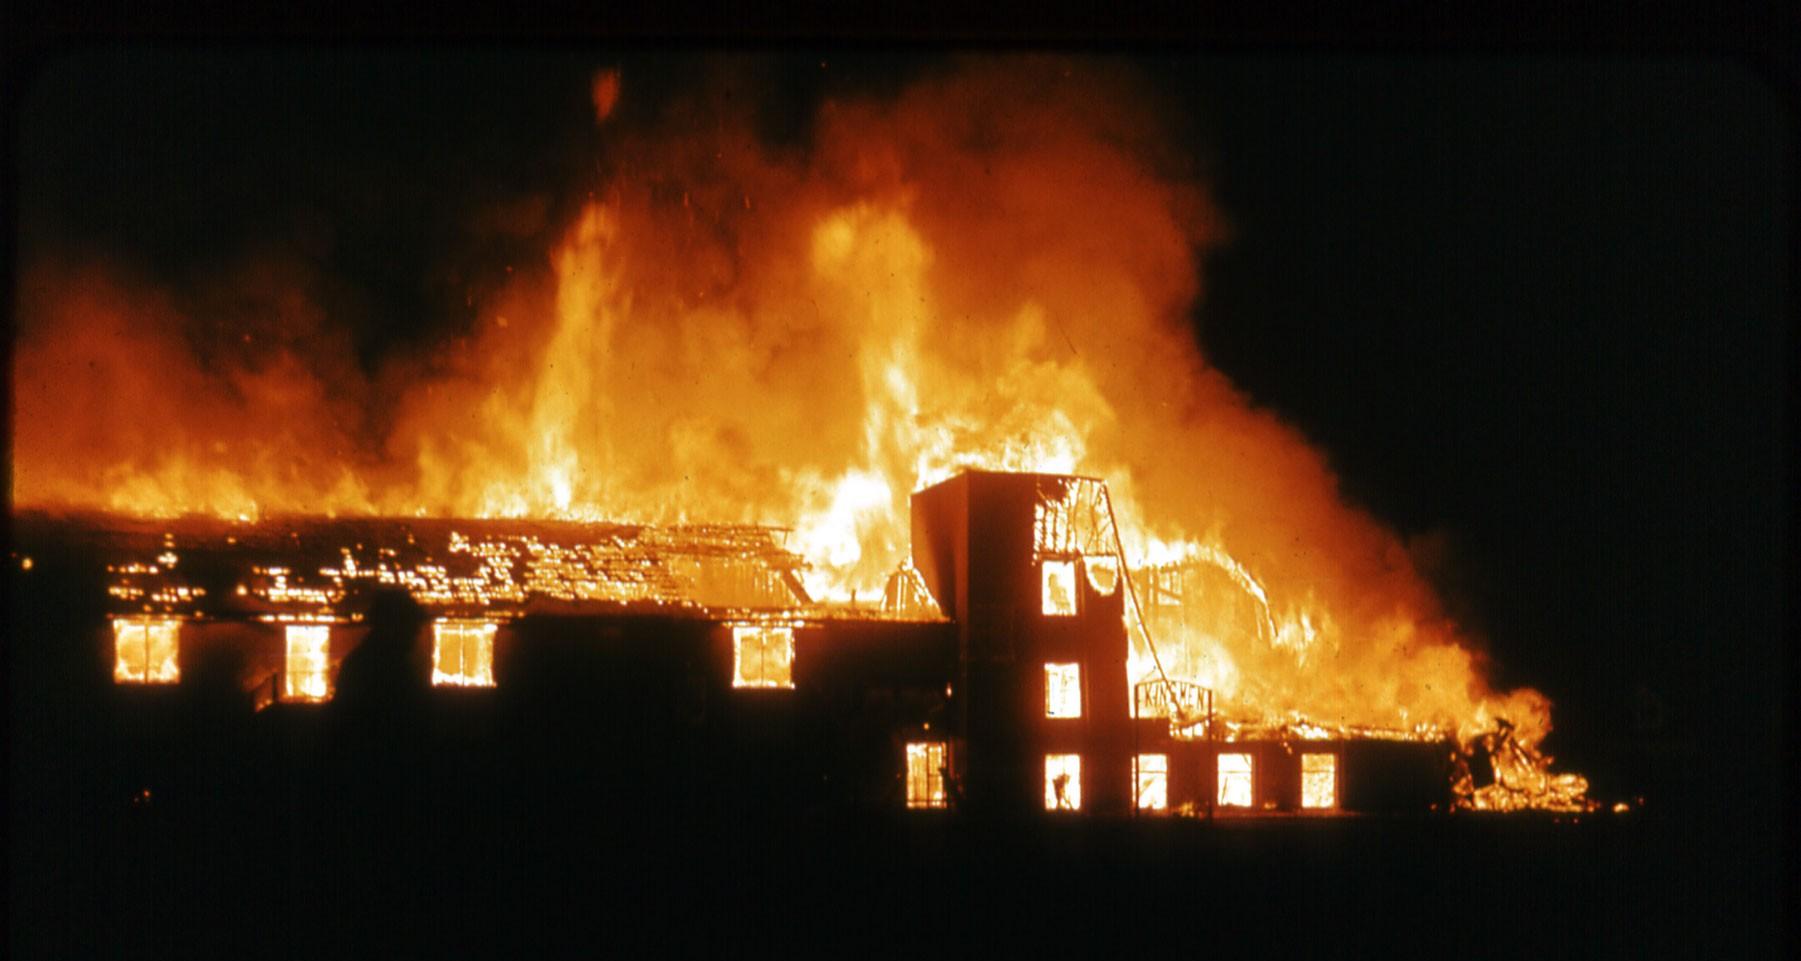 Thermal insulation also protects against fire